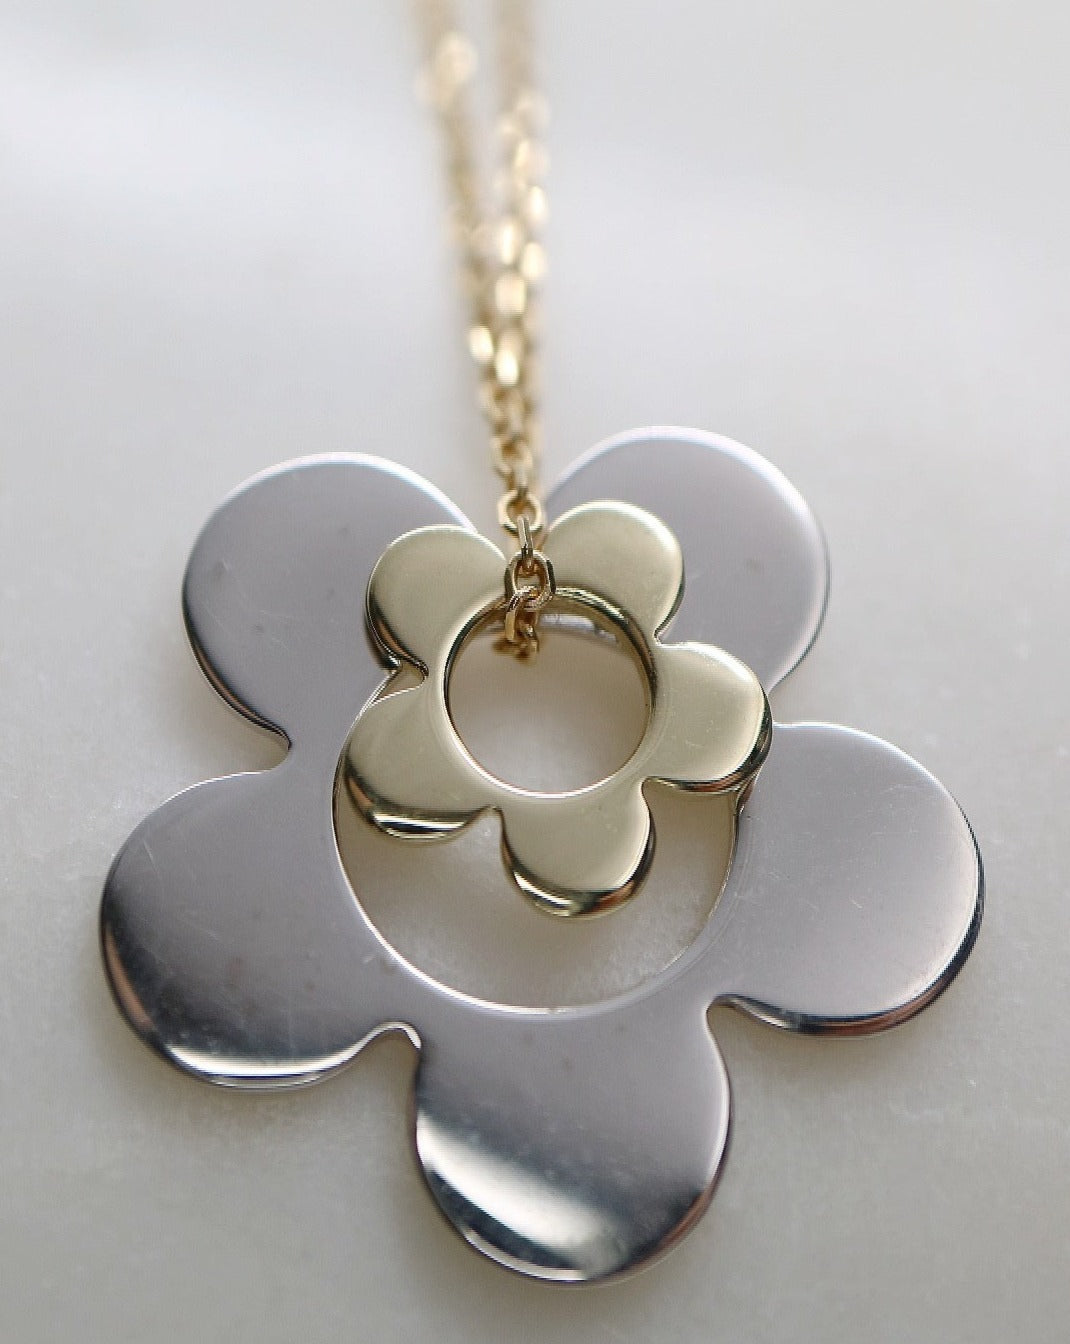 Silver and gold daisy charms on gold chain